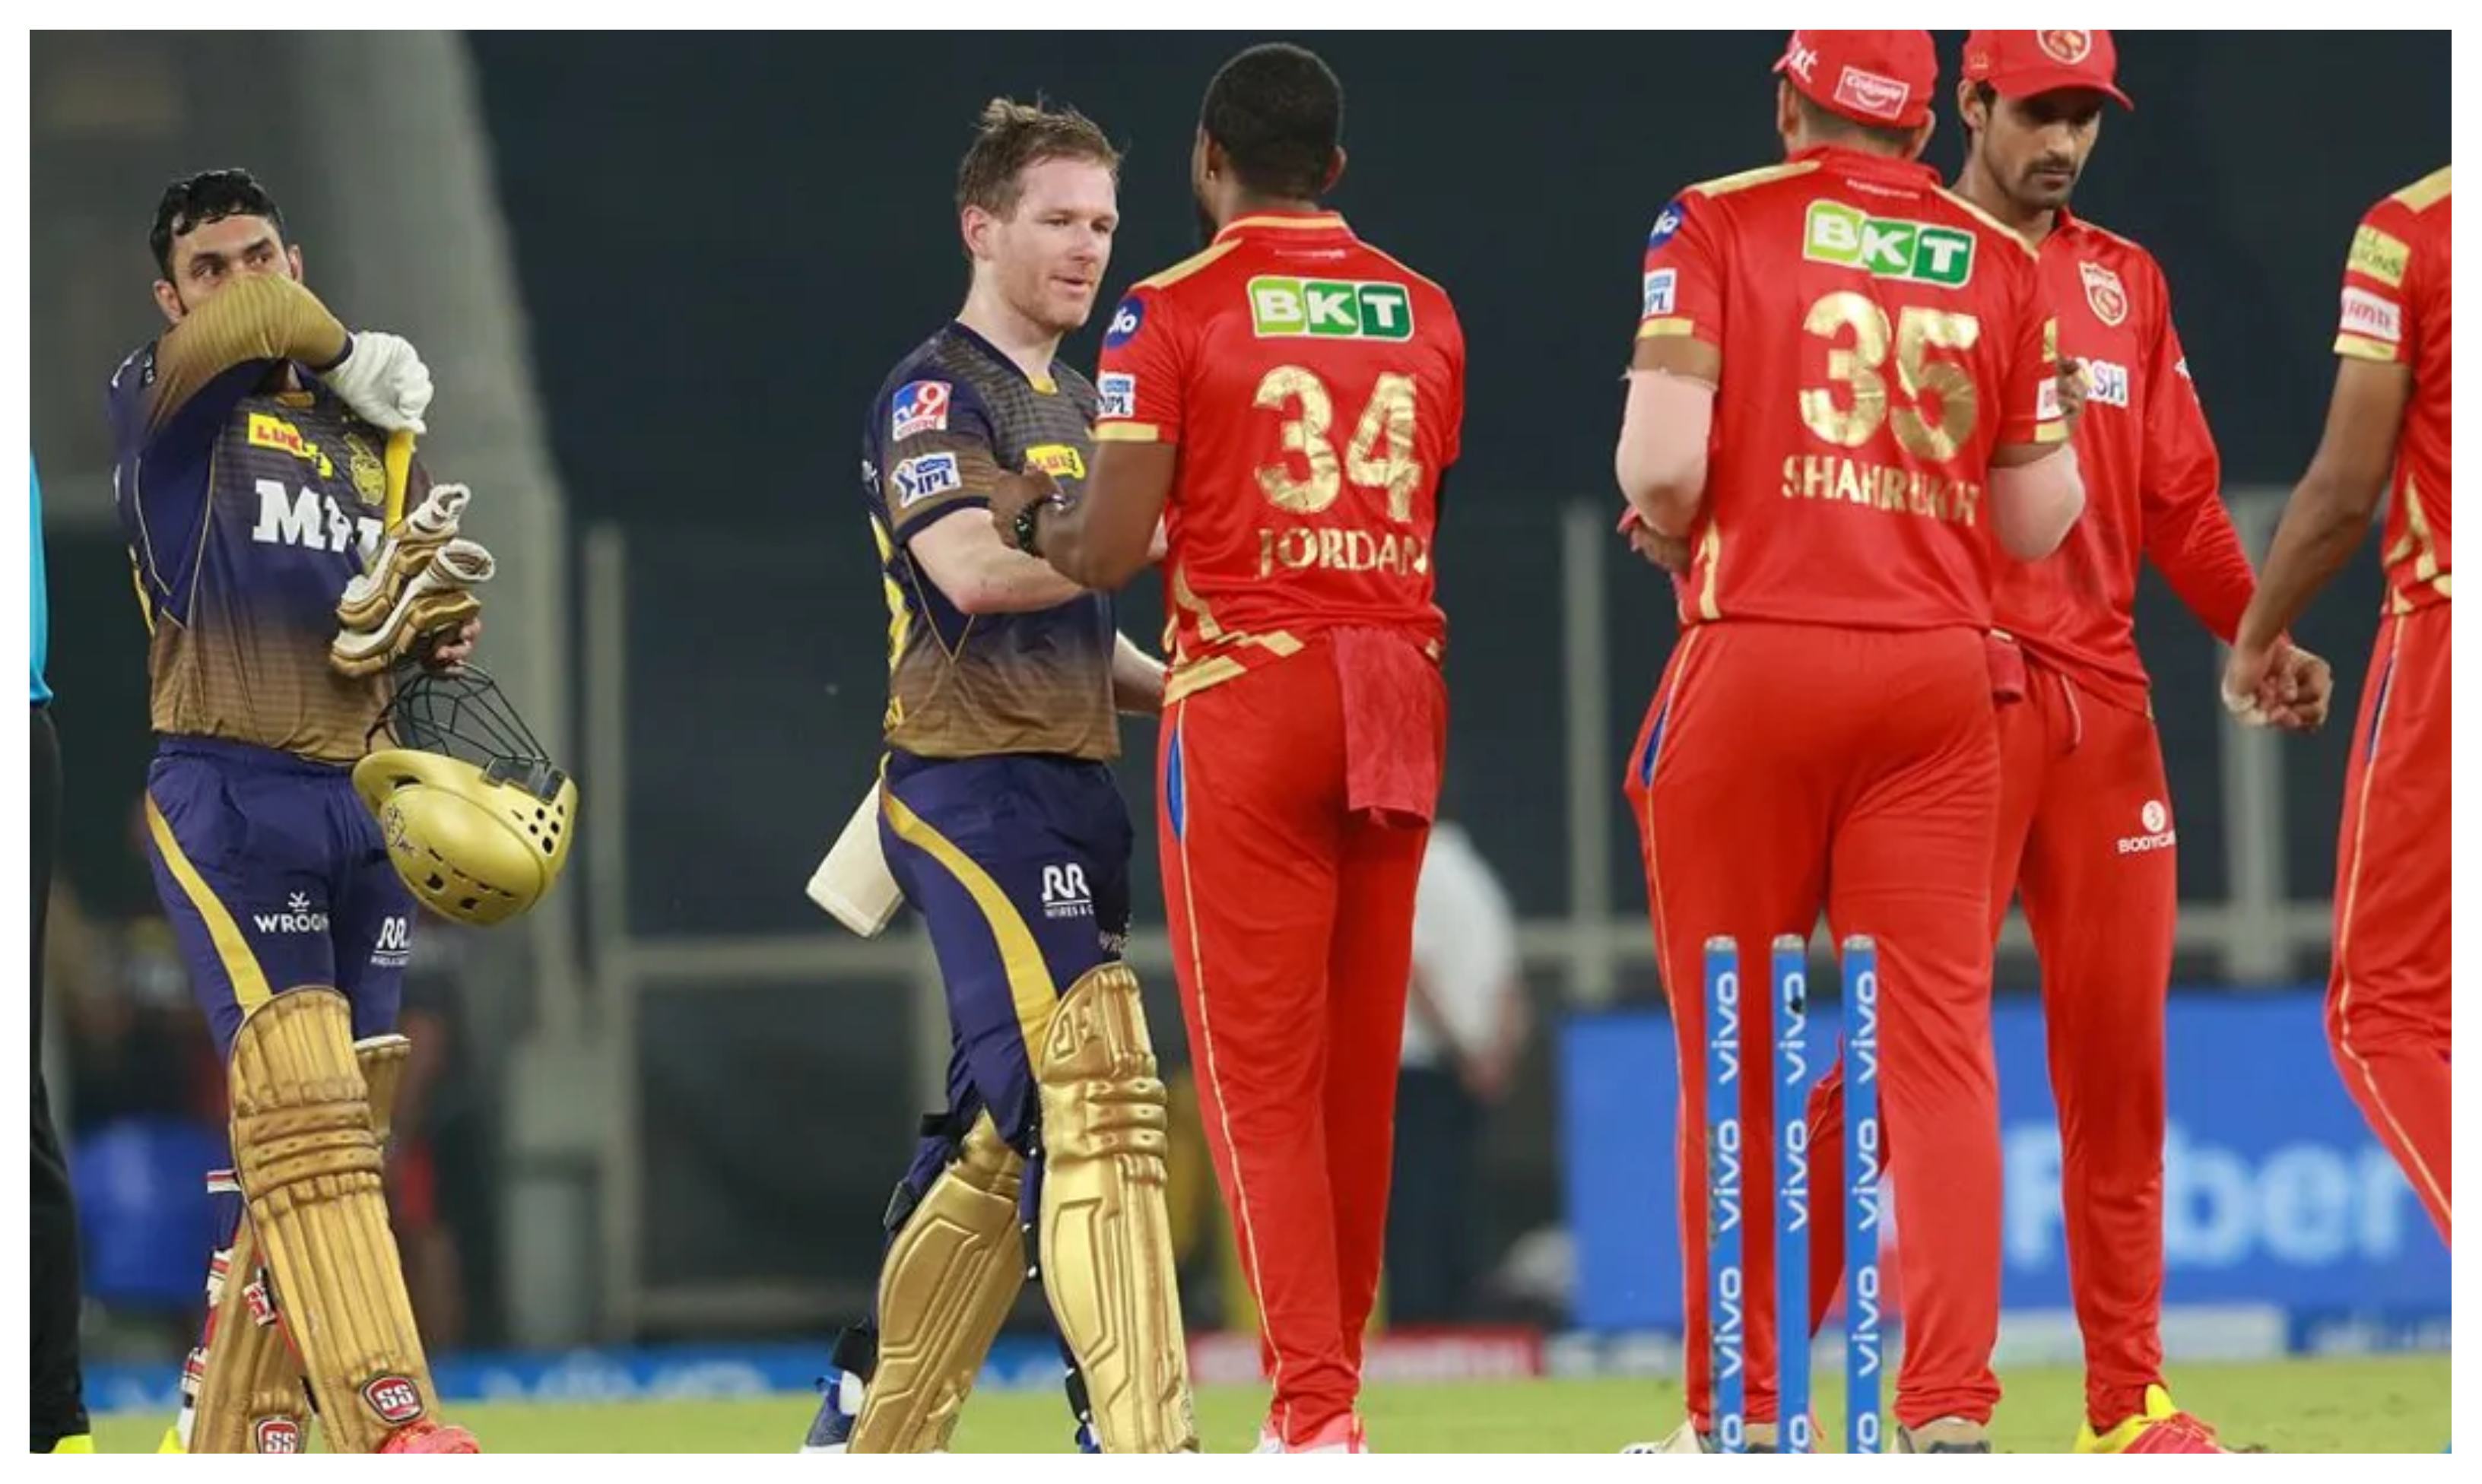 Eoin Morgan starred with the bat in KKR's big win over PBKS | BCCI/IPL